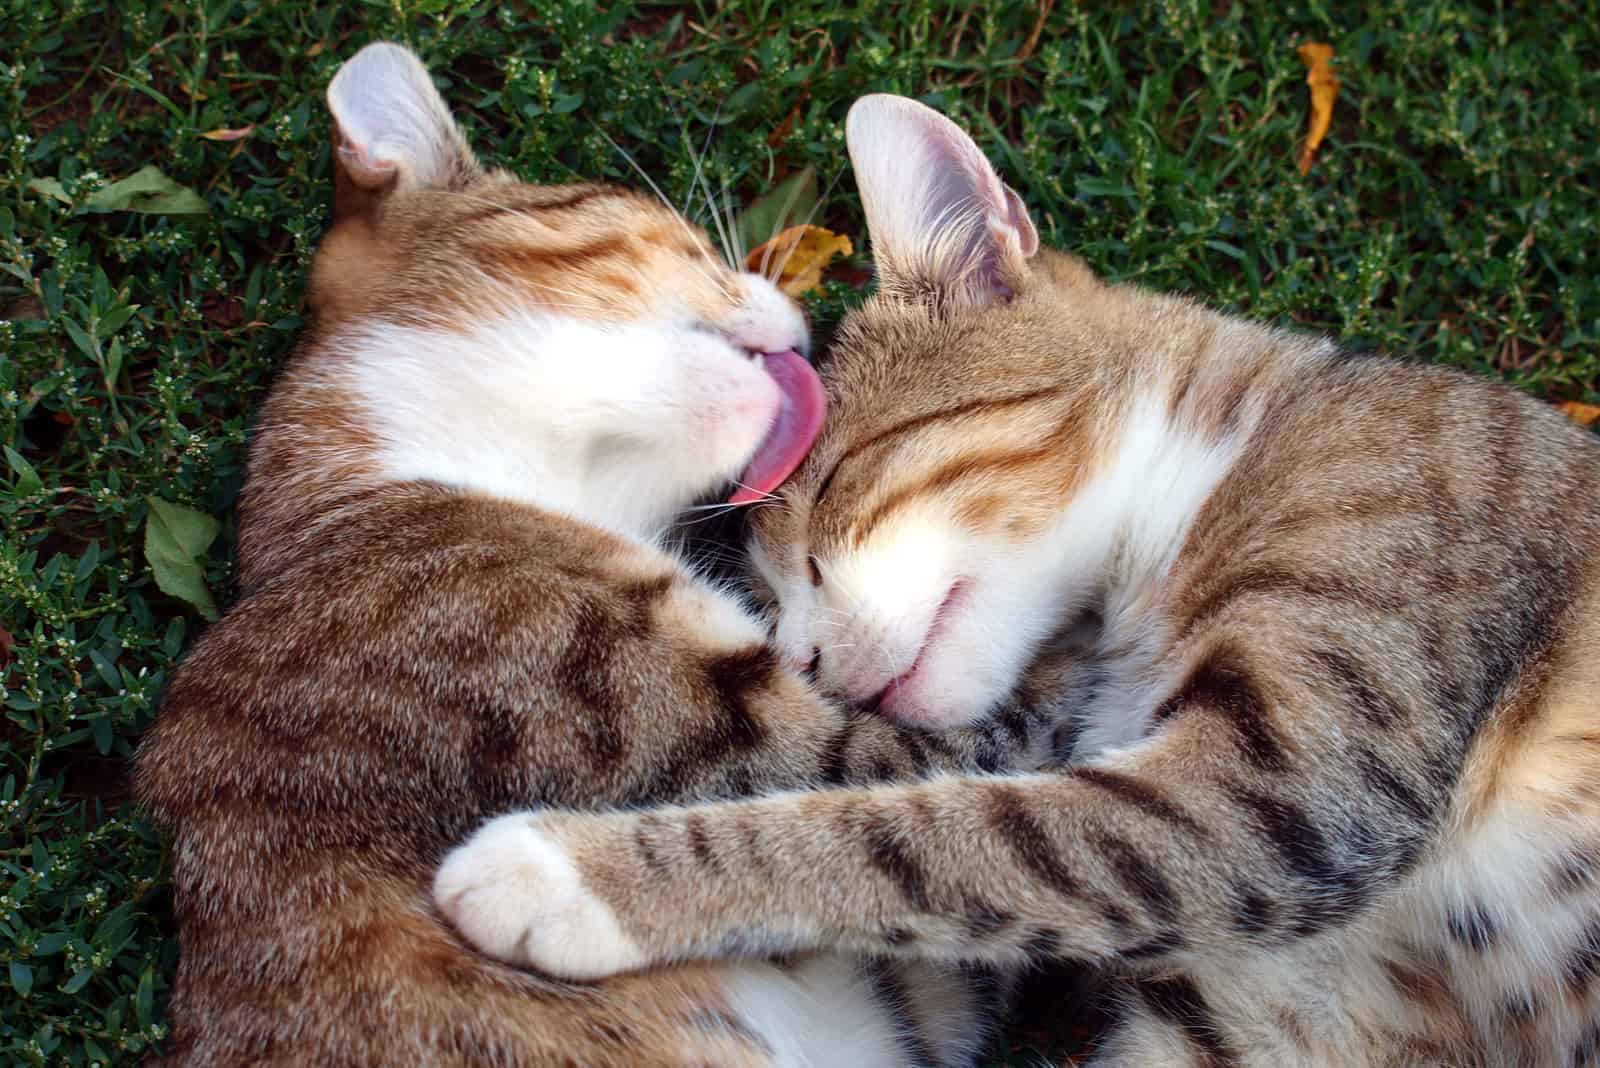 cat licking other cat on the grass